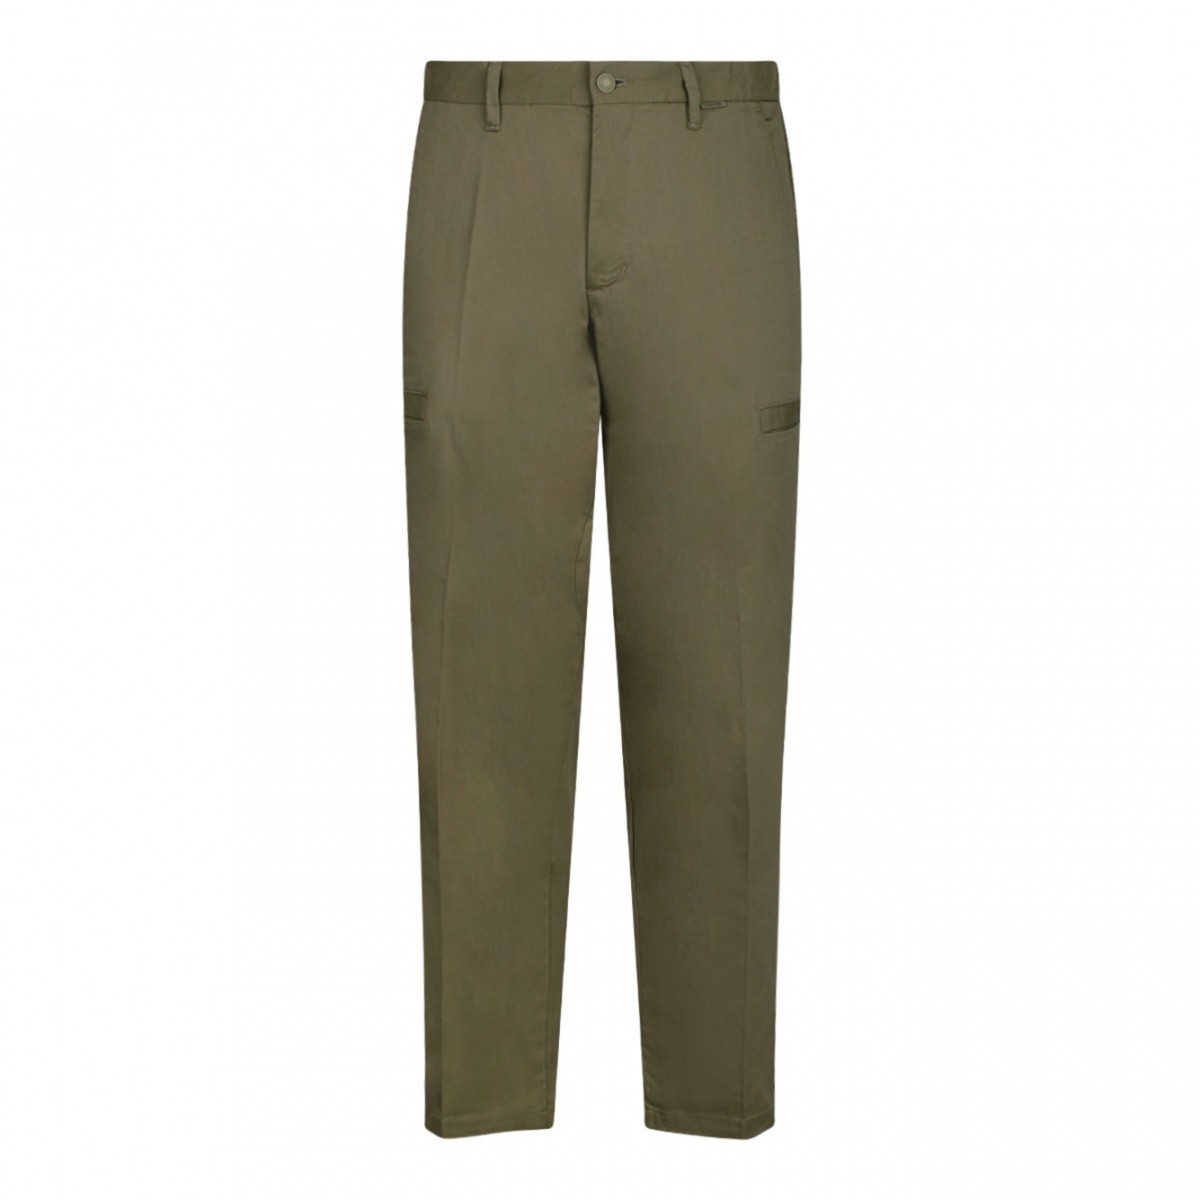 Co-stretch Straight Military Green Cargo